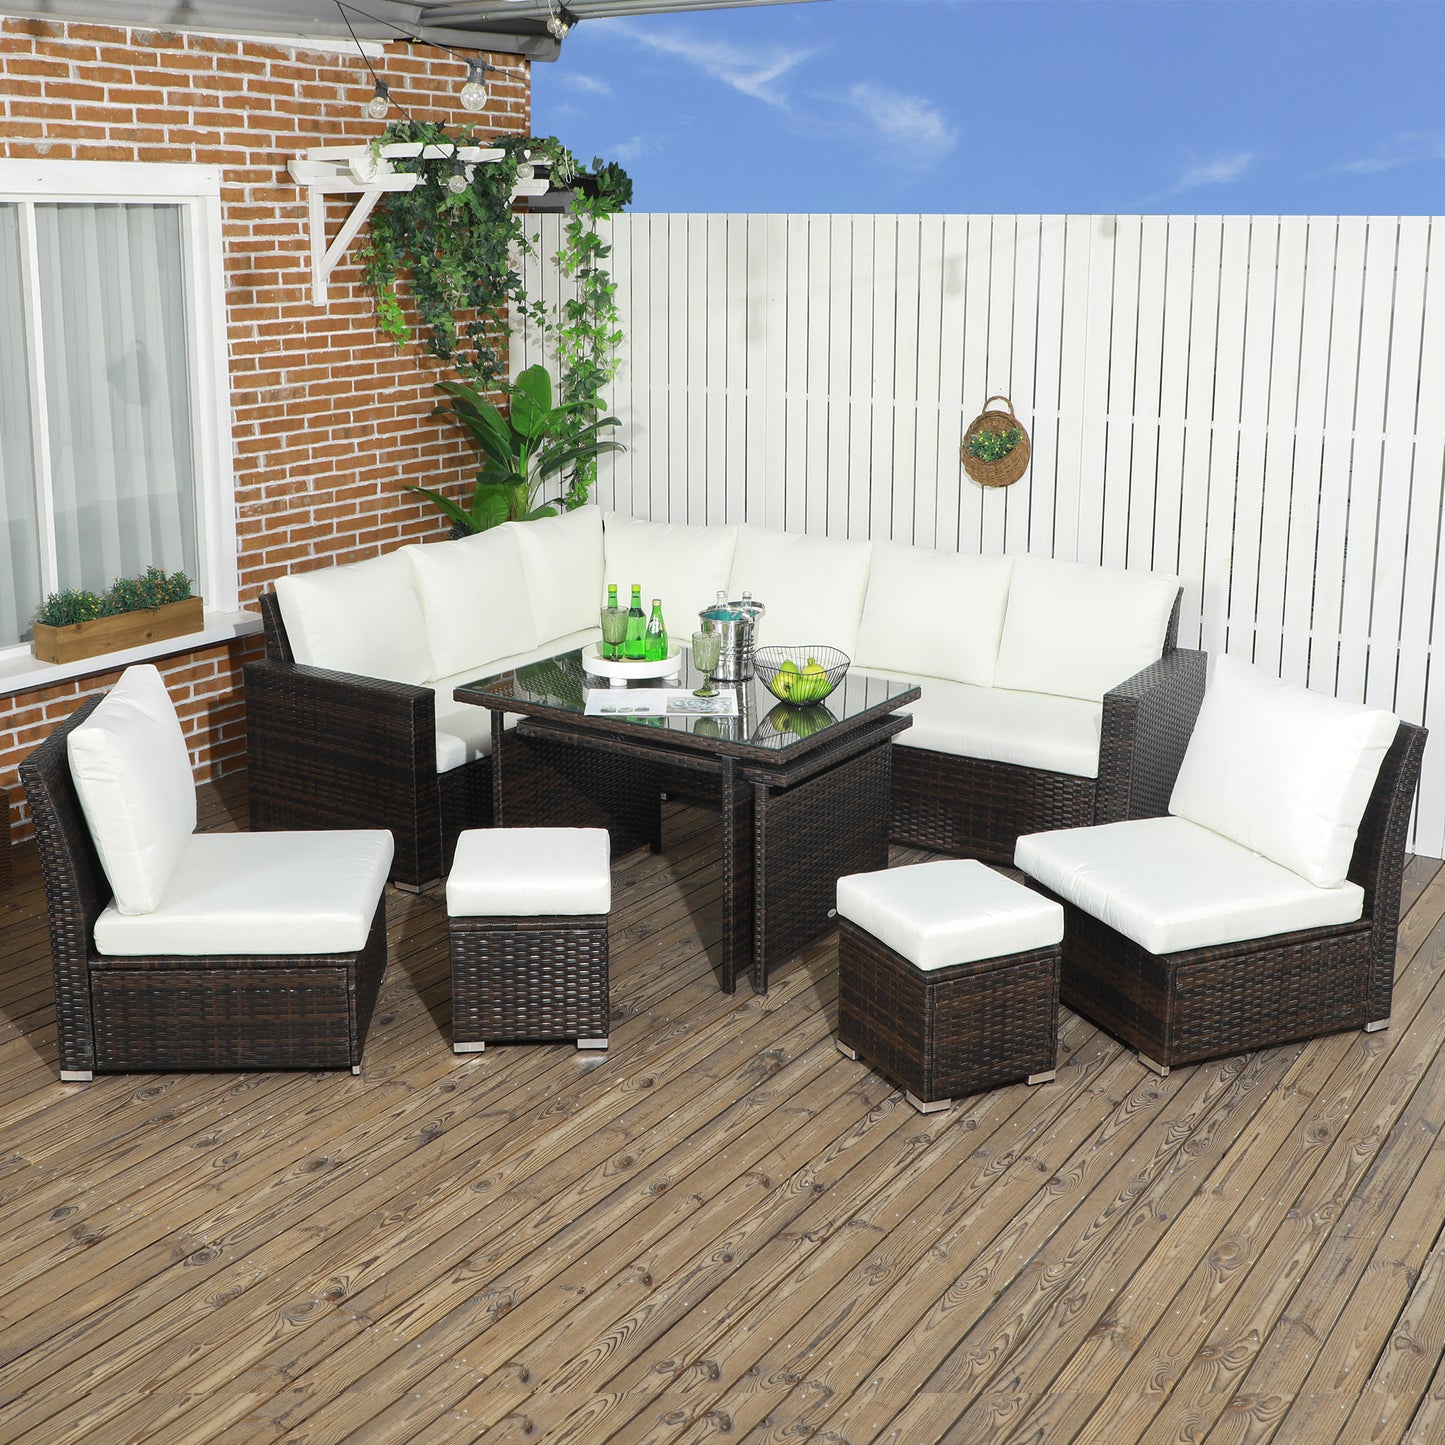 Outsunny 7 Piece Rattan Garden Furniture Set with Cushioned Sofa Seat, Footstools and Expandable Glass Table, 10-Seater, Cream